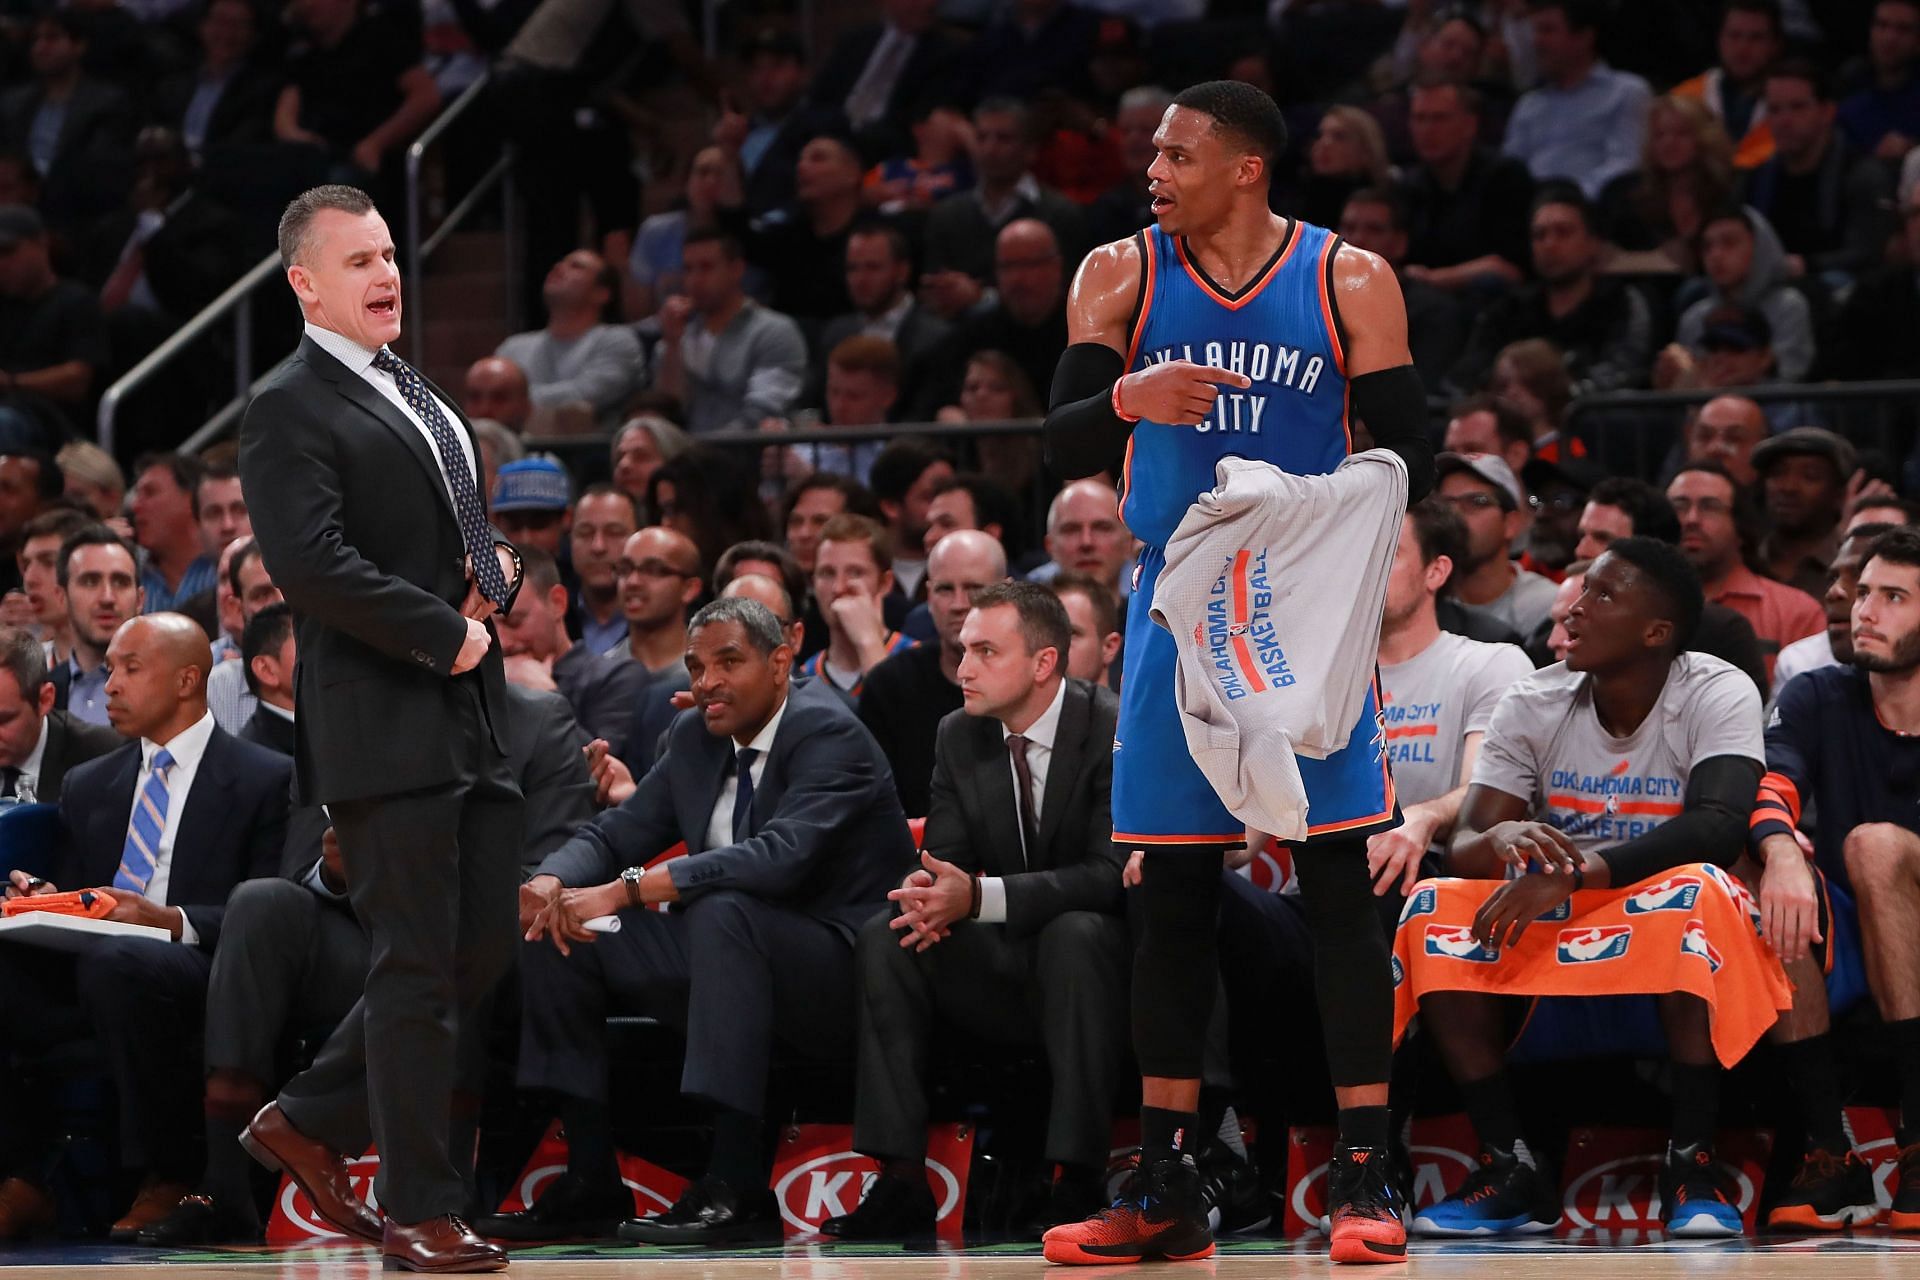 Current Chicago Bulls coach Billy Donovan coached Russell Westbrook on the Oklahoma City Thunder.